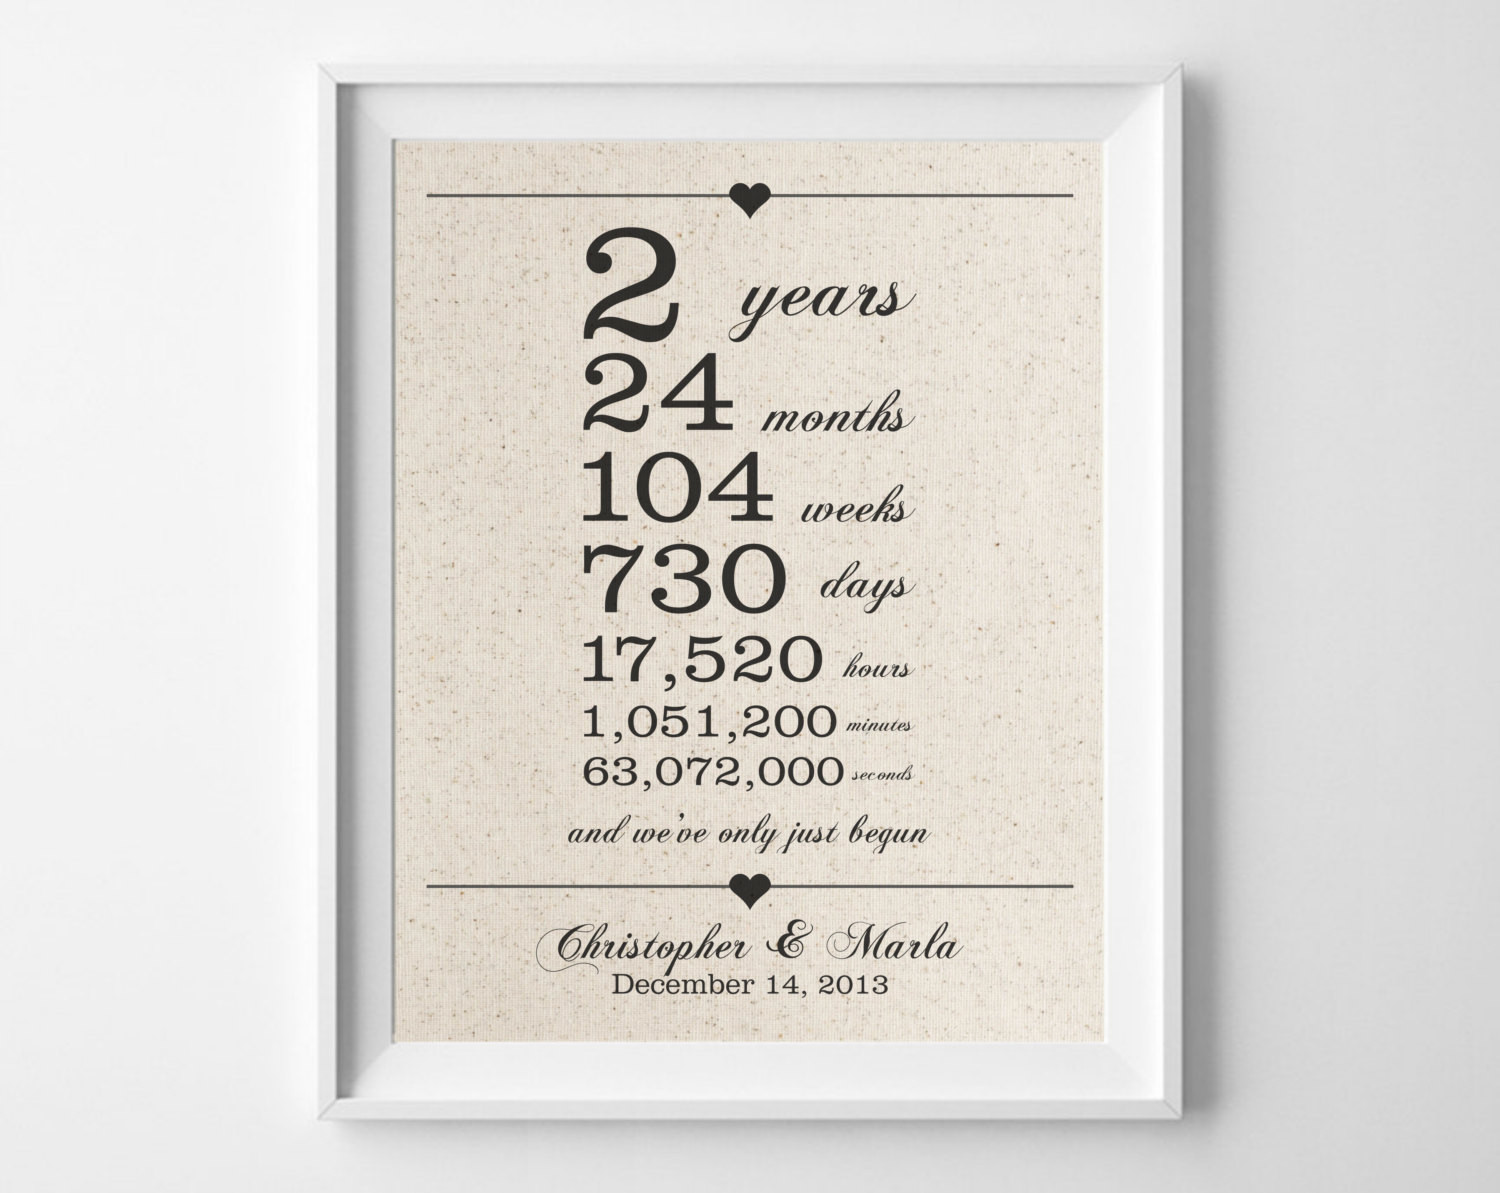 Second Year Anniversary Gift Ideas
 2 years to her Cotton Anniversary Print 2nd Anniversary